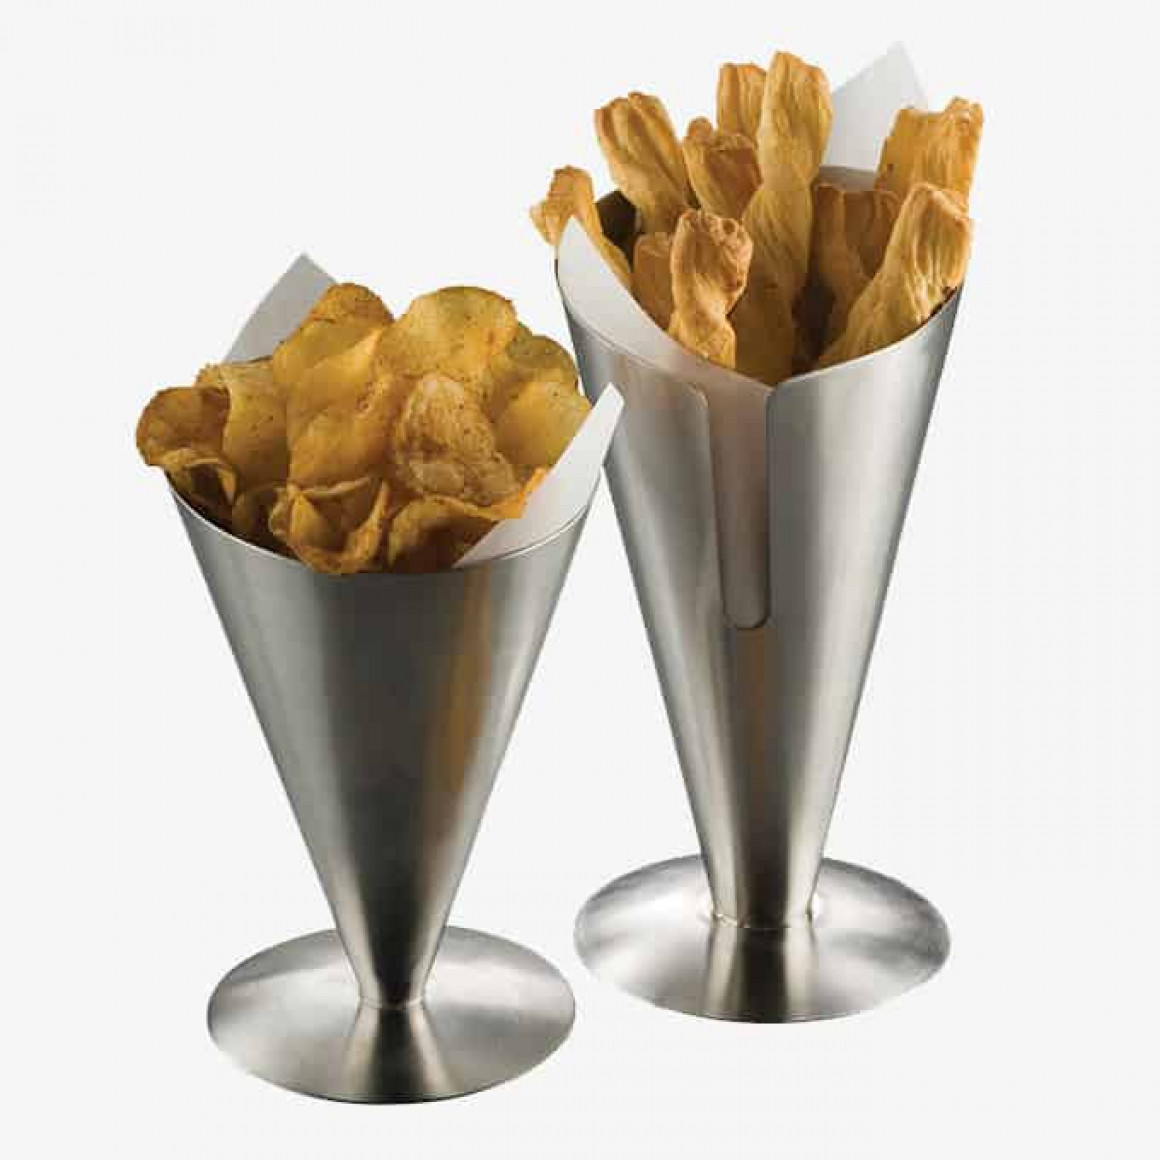 CONICAL SNACK HOLDER, STAINLESS STEEL